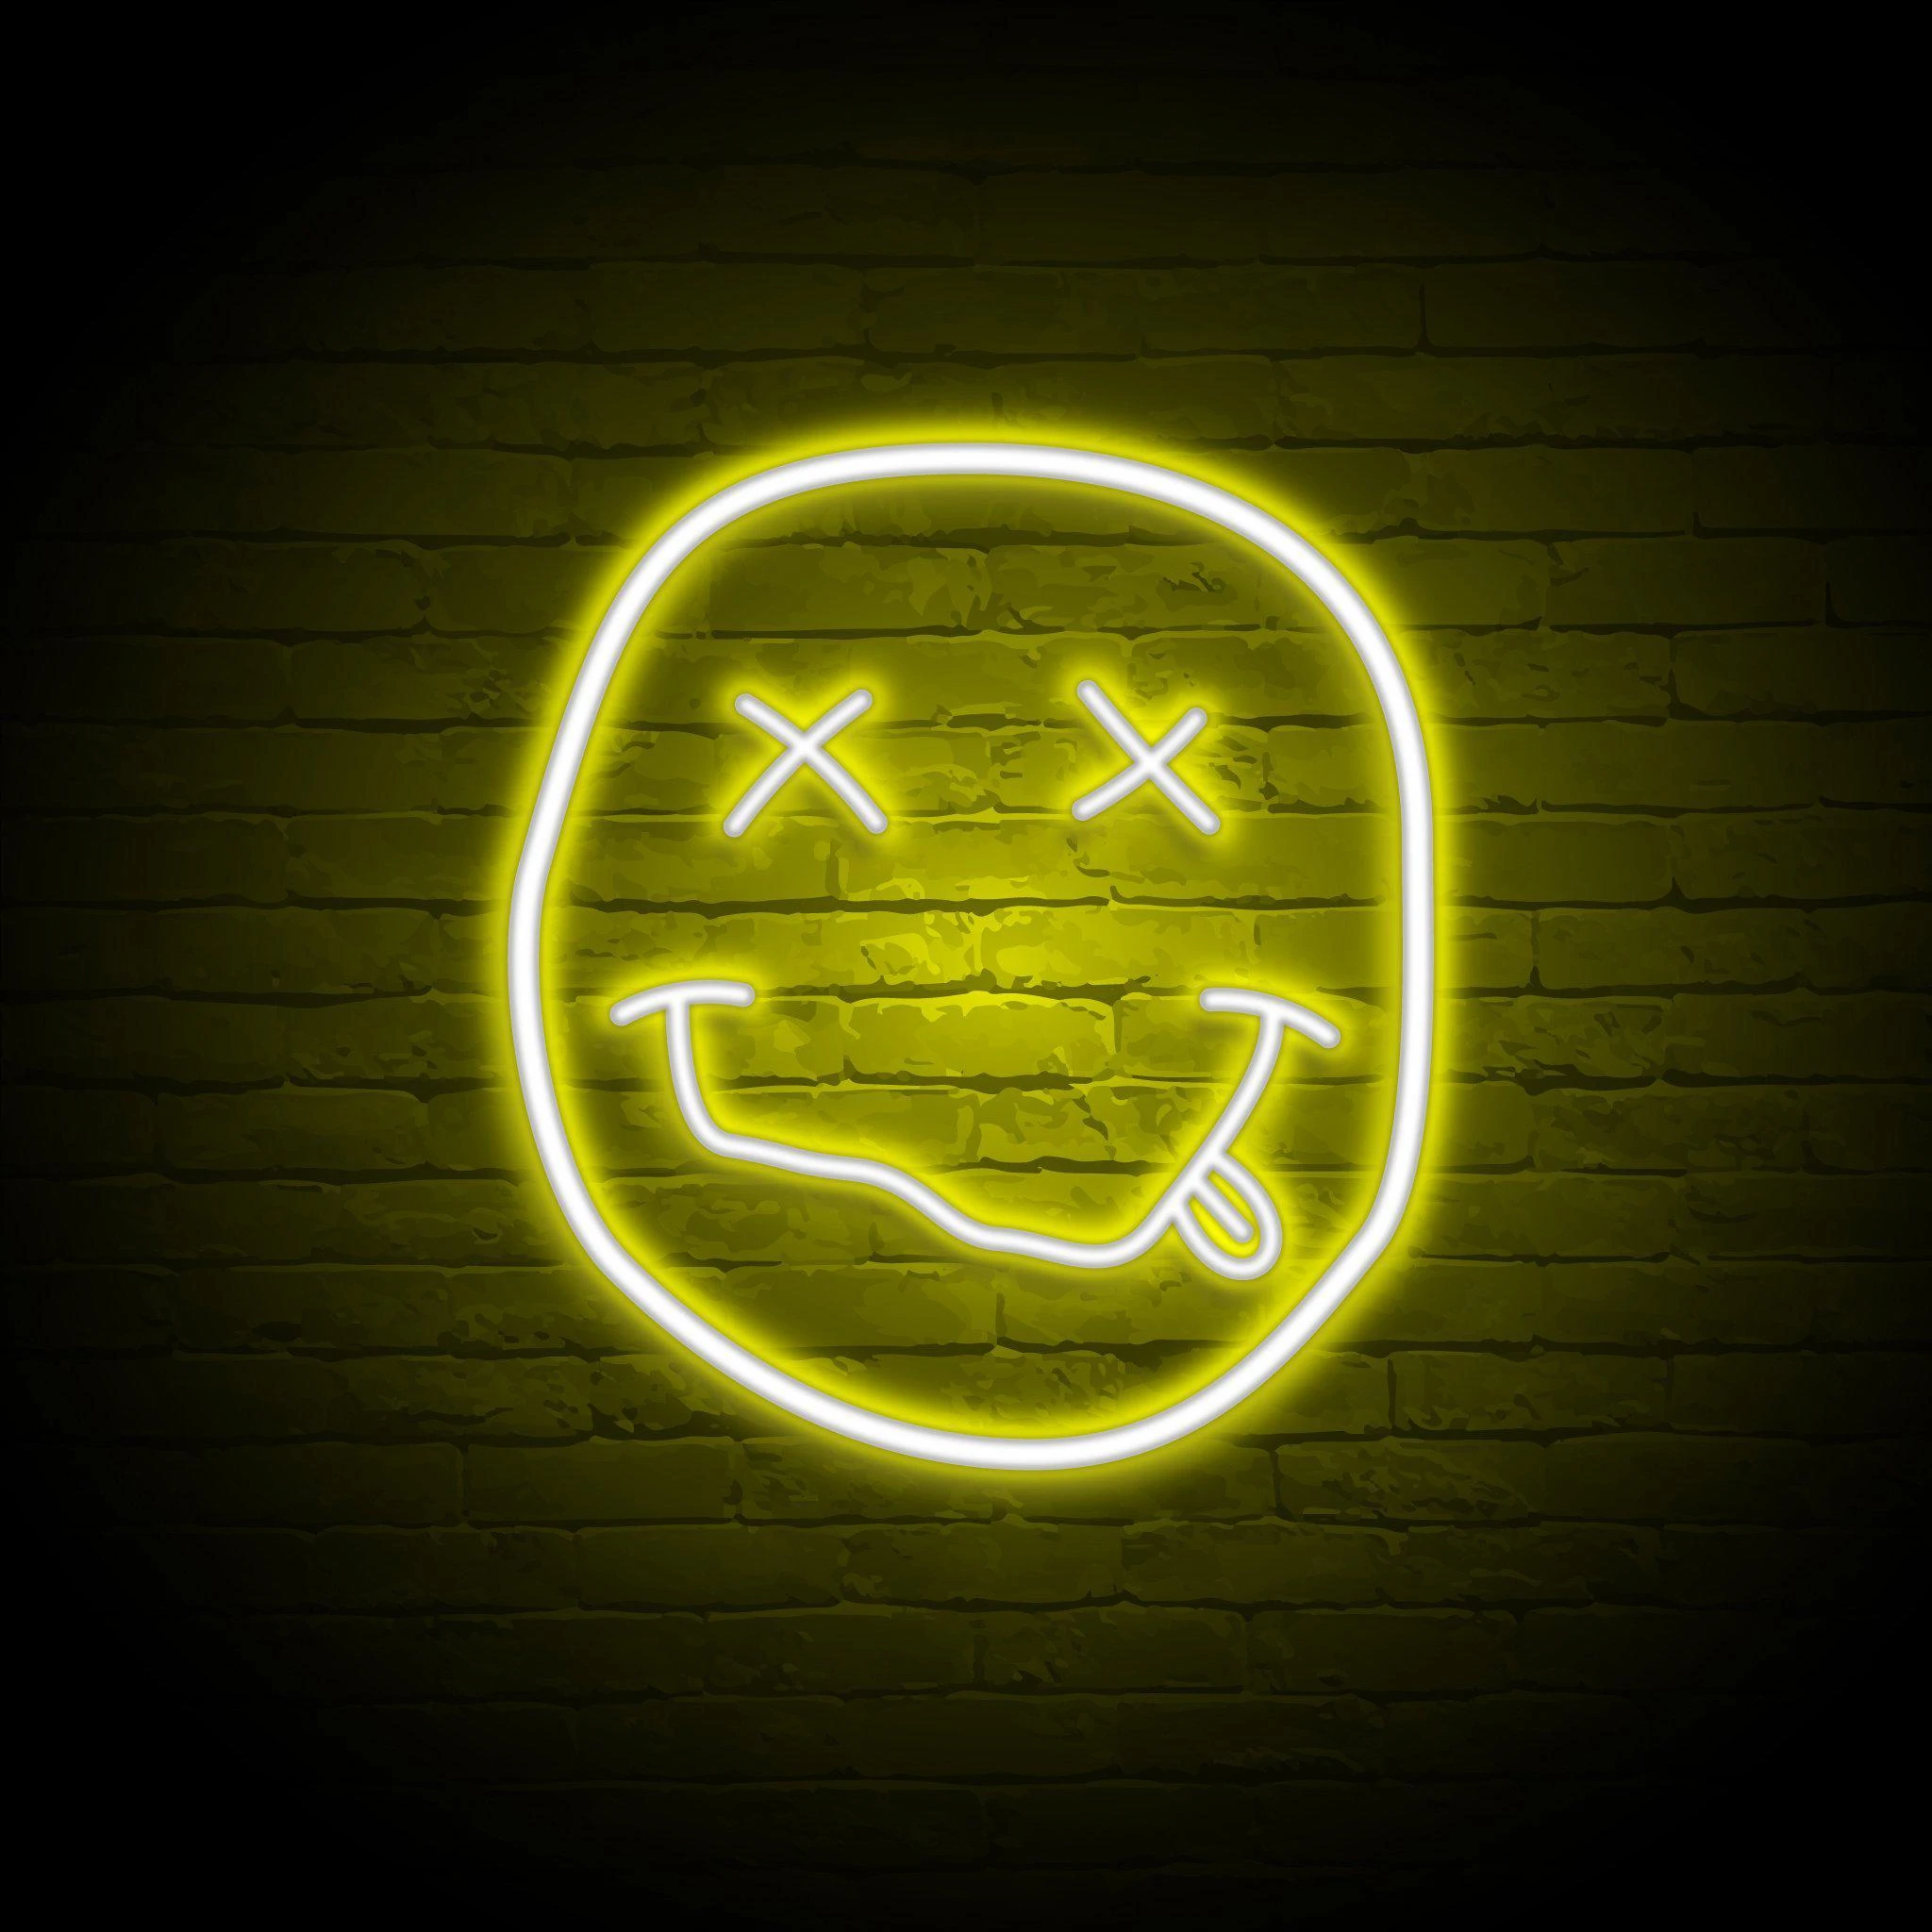 'NIRVANA SMILEY FACE' NEON SIGN - NeonFerry